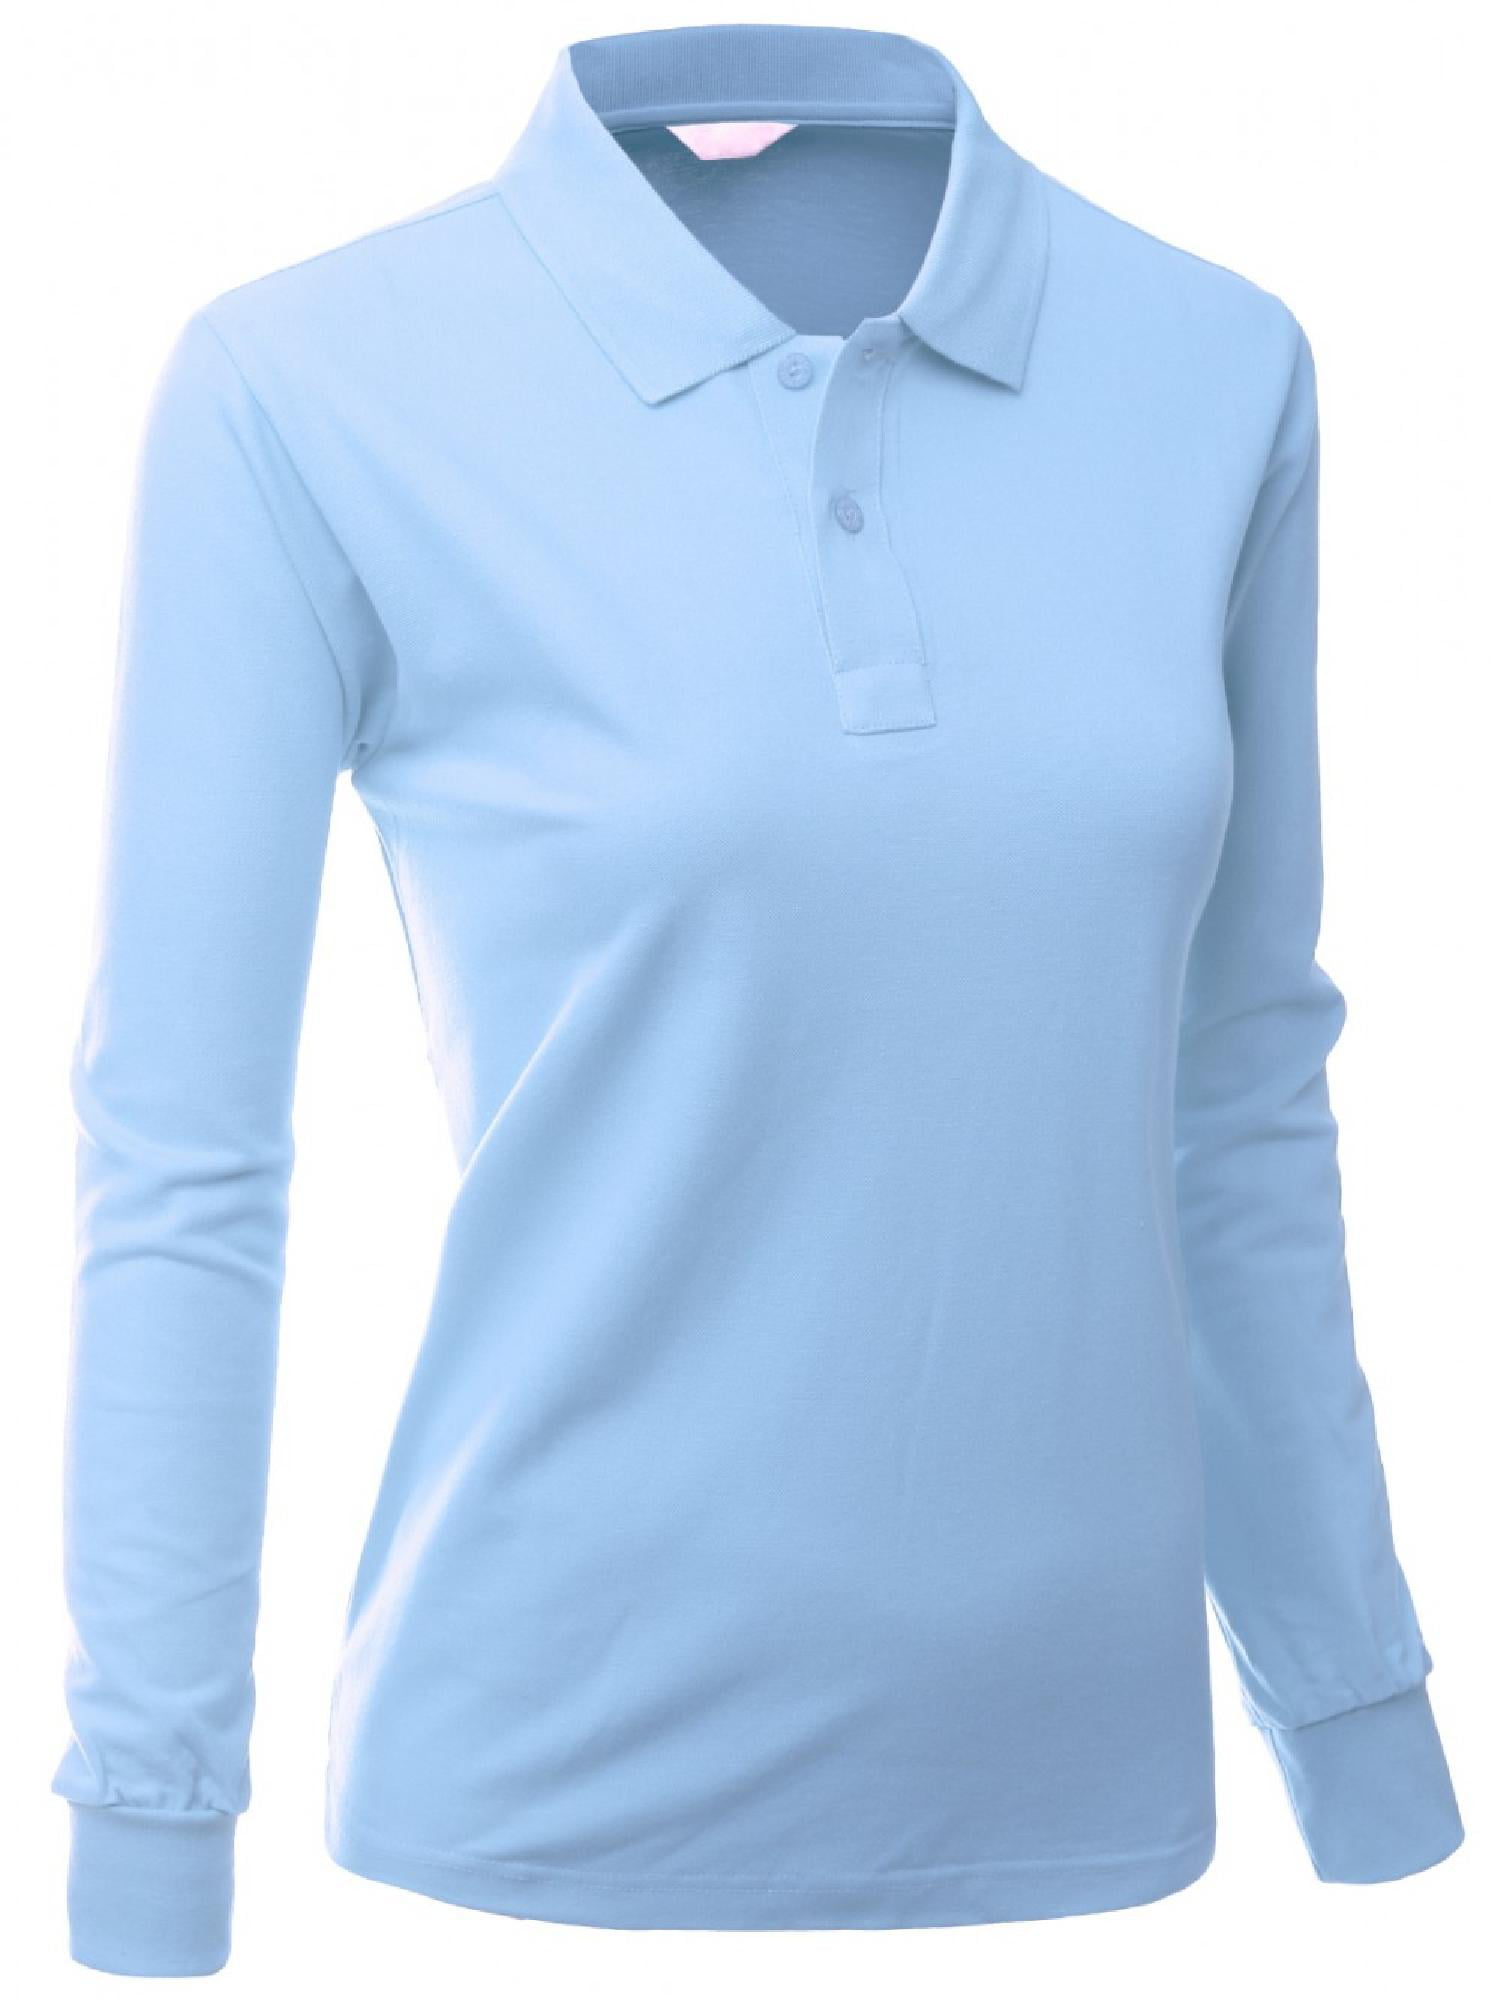 women's long sleeve collared t shirts